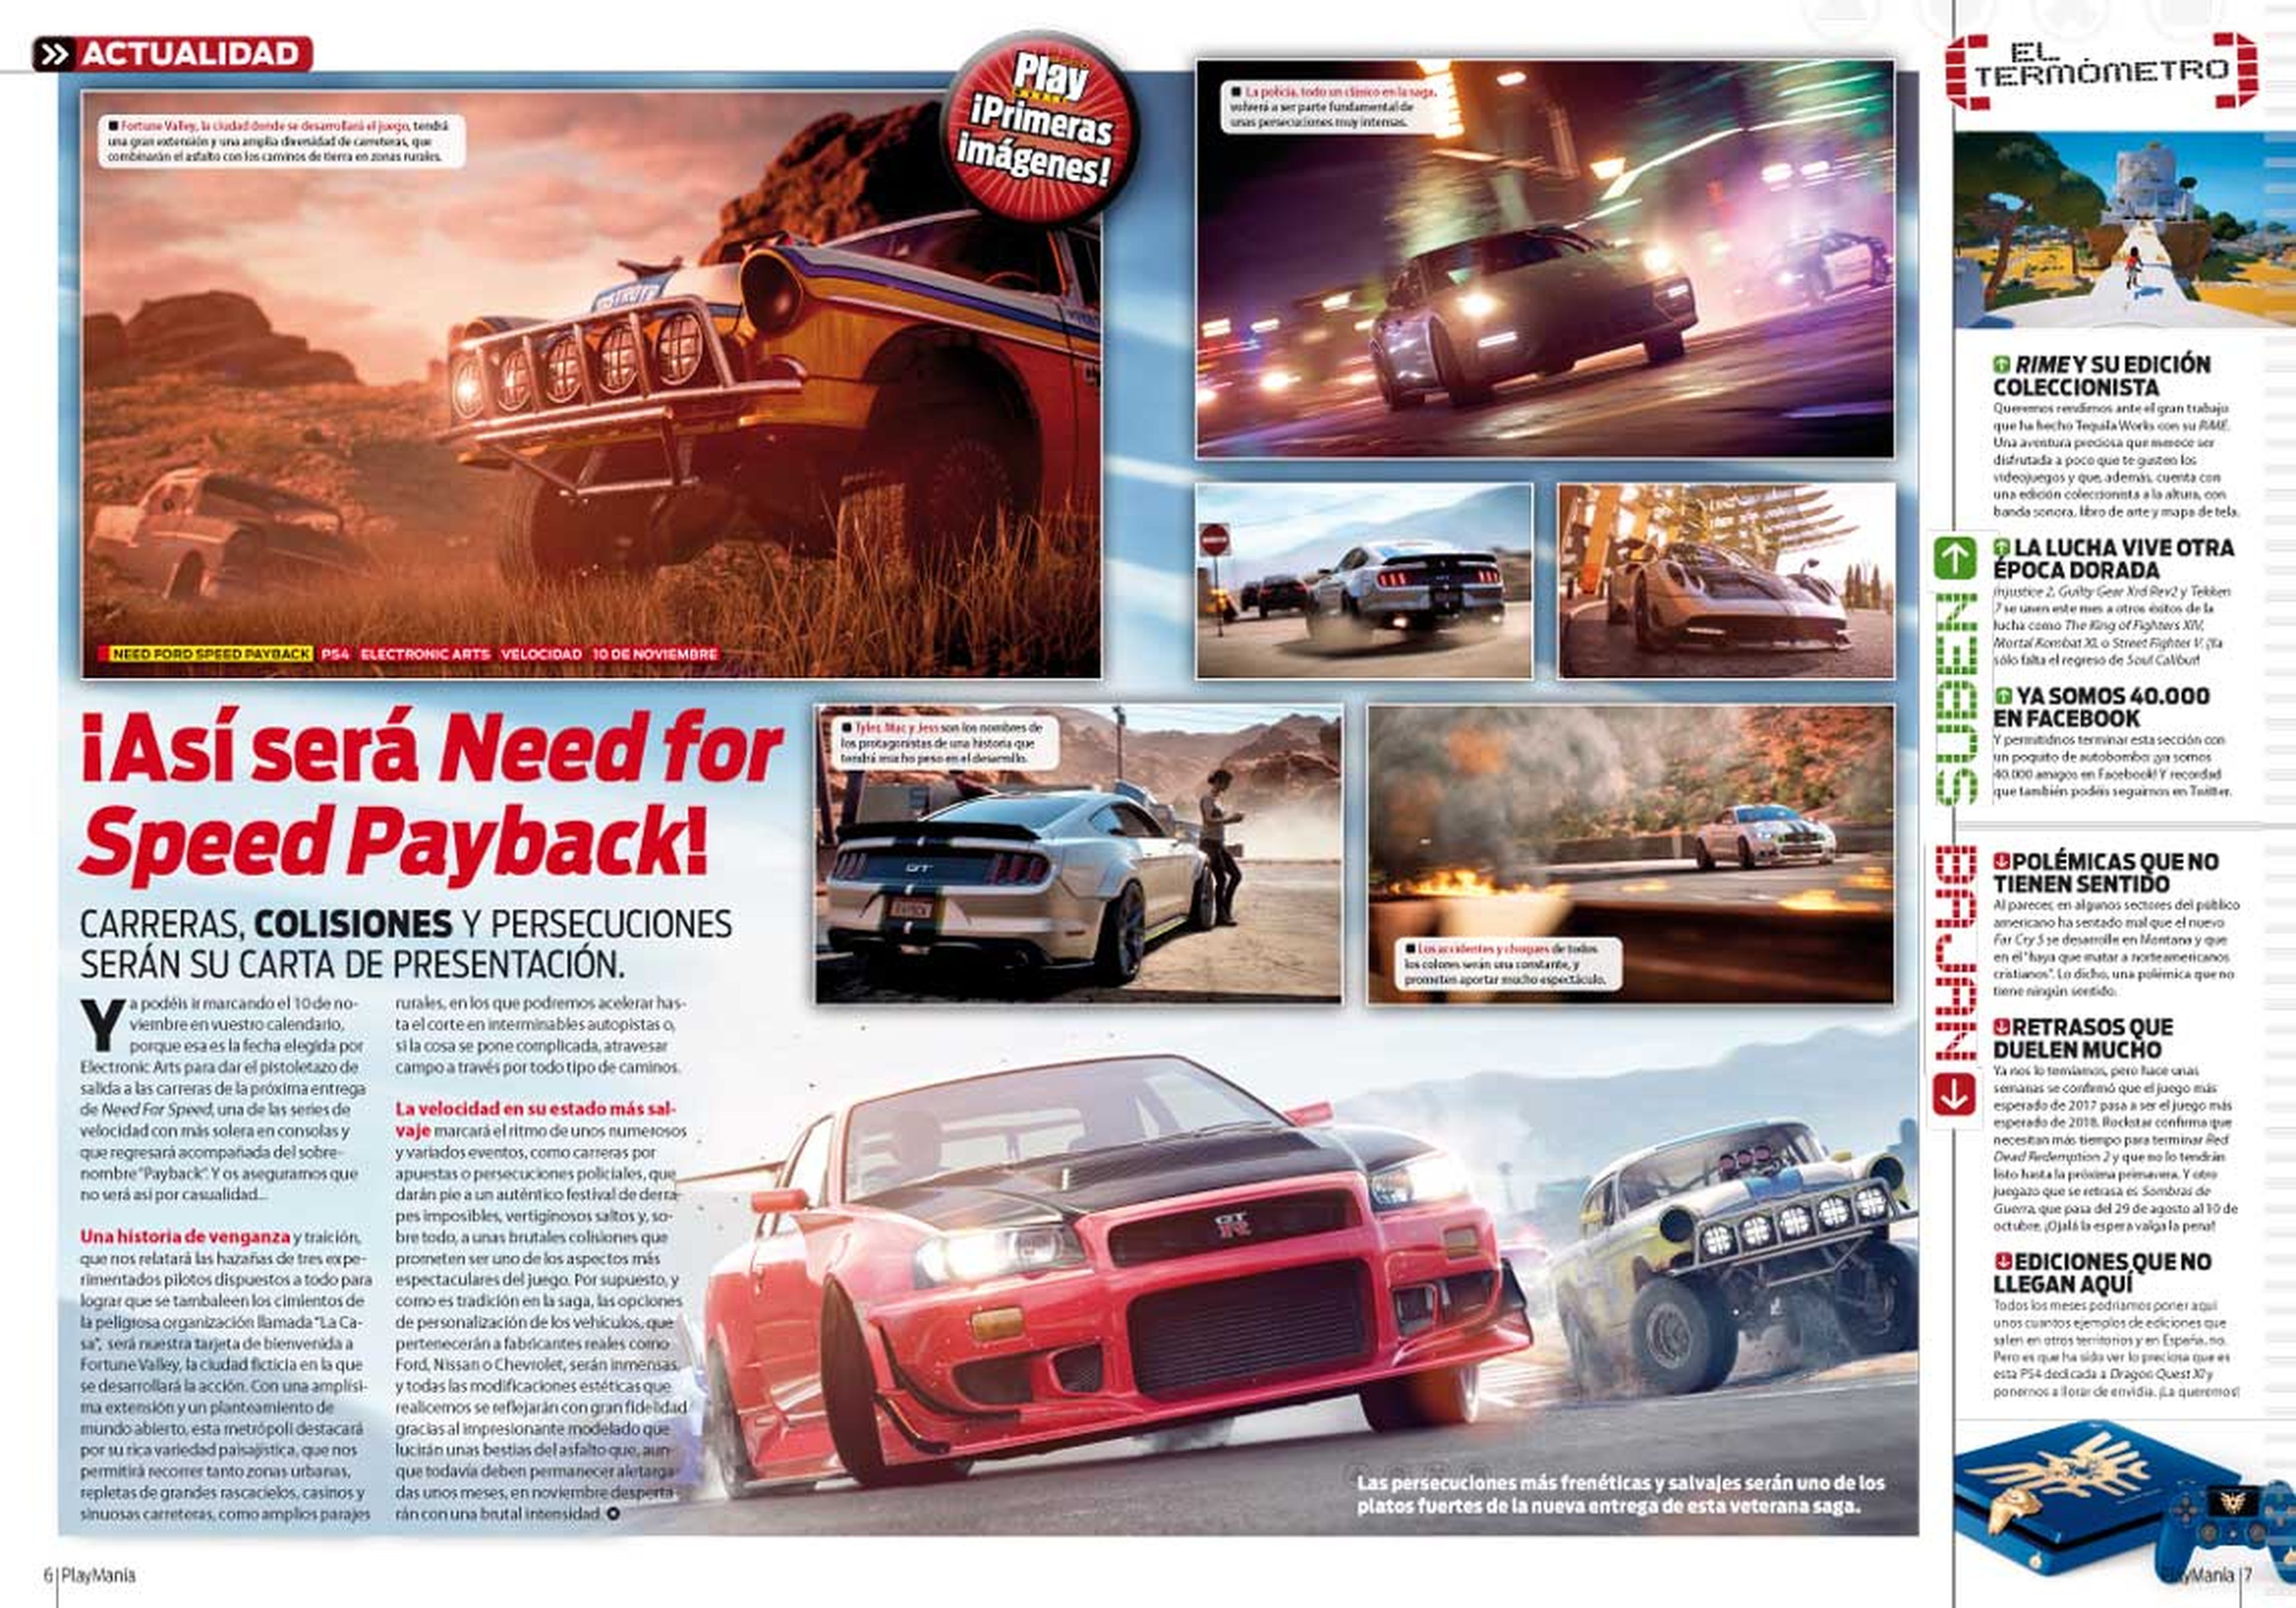 Need for Speed Payback en Playmania 224